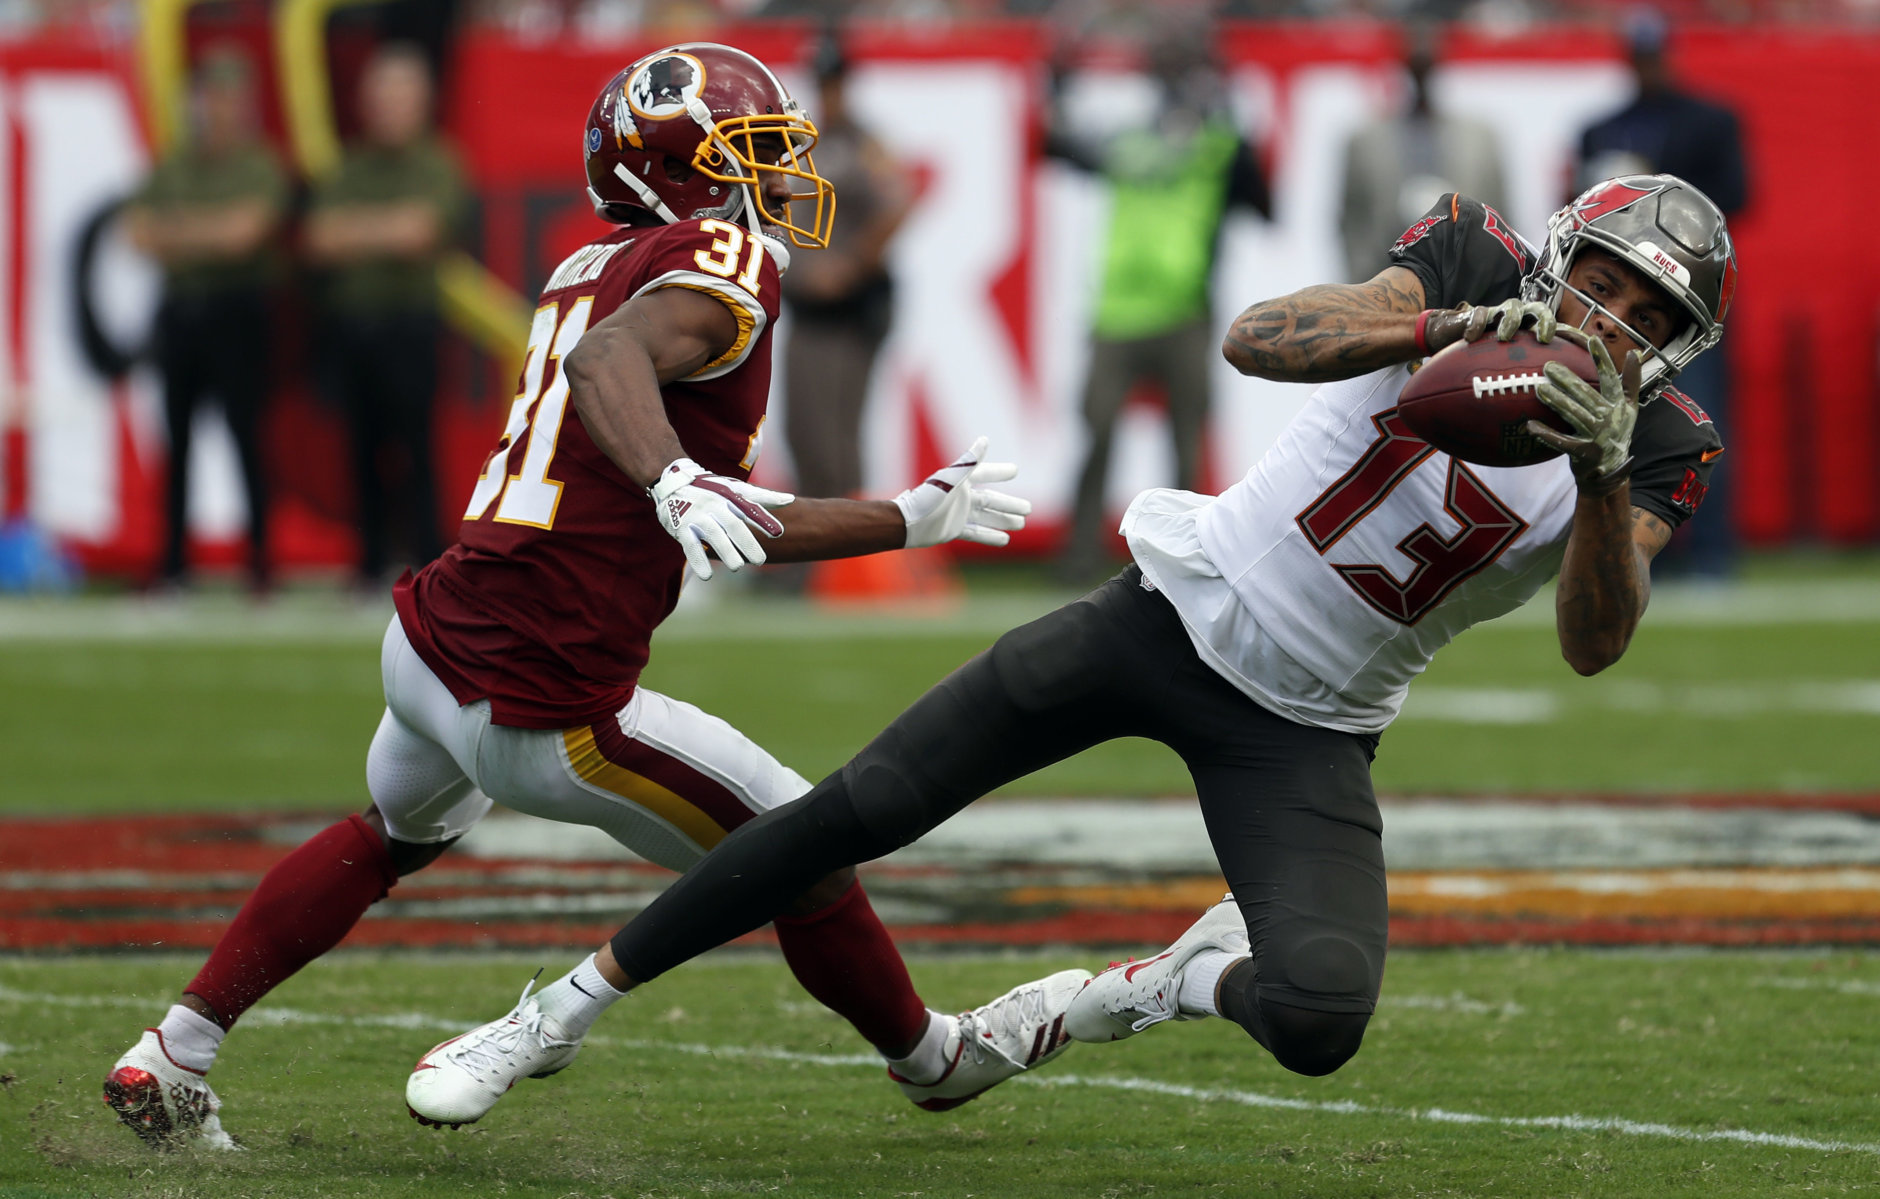 Tampa Bay Buccaneers wide receiver Mike Evans (13) makes a reception in front of Washington Redskins cornerback Fabian Moreau (31) during the second half of an NFL football game Sunday, Nov. 11, 2018, in Tampa, Fla. (AP Photo/Mark LoMoglio)